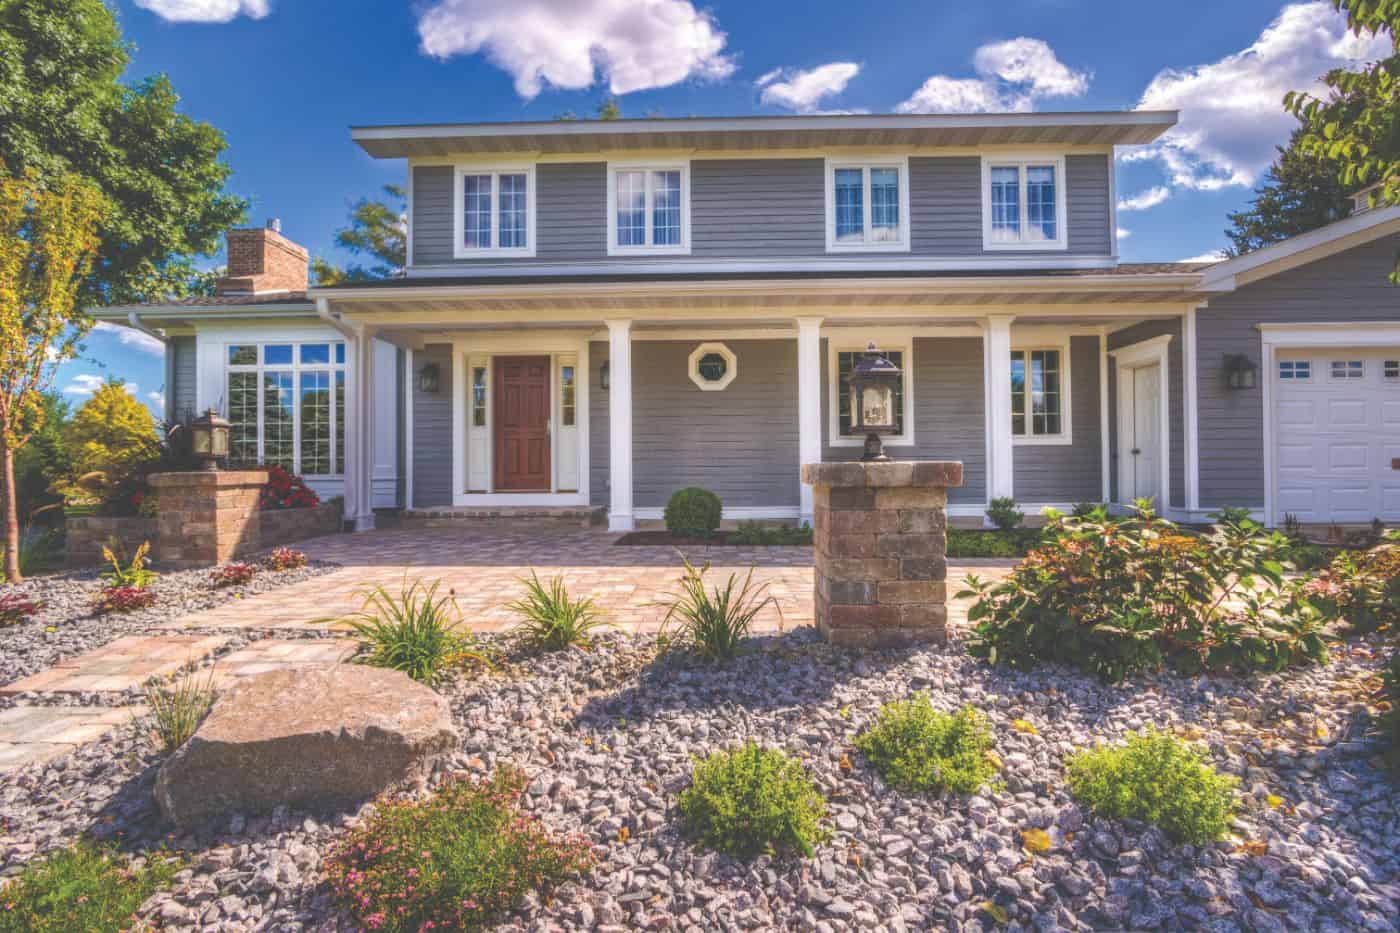 A modest two-story home with gray siding and matching white trim around every window. The front yard is paved with paver stones, gravel, and plants and the house stands against a bright blue cloudy sky.